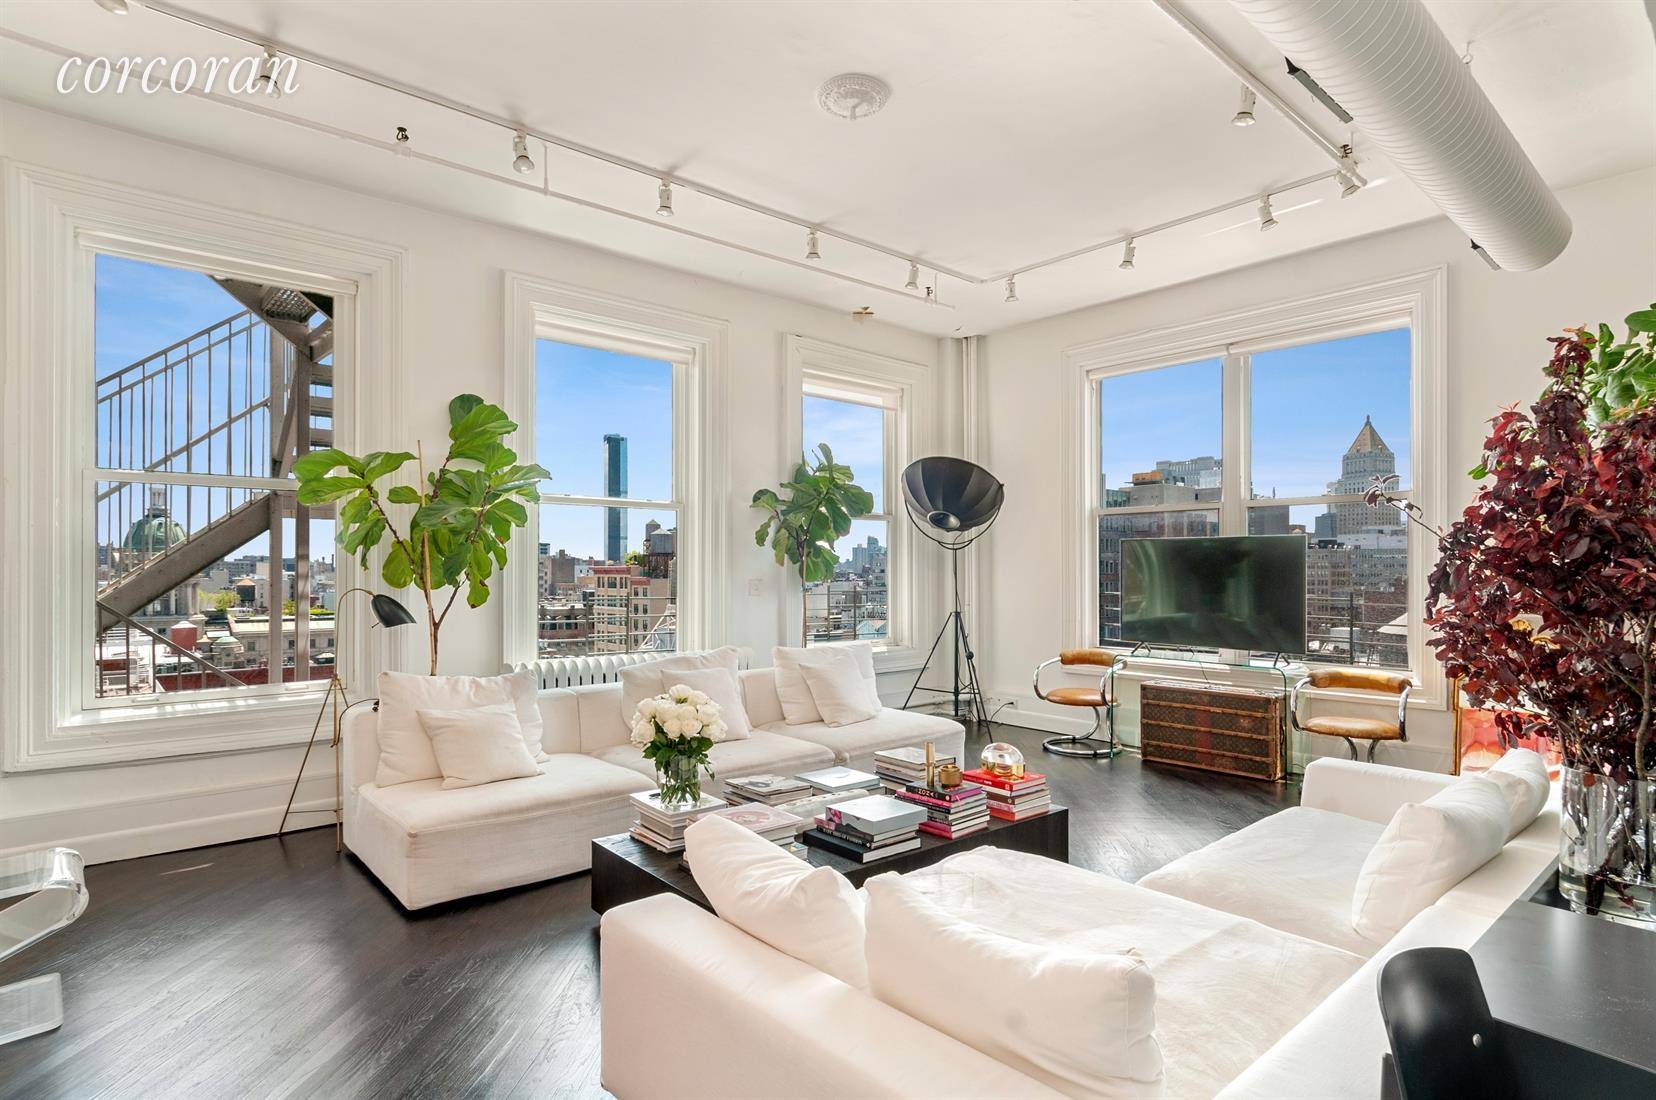 Prime Soho Quintessential Classic 2 Bedroom corner Prewar Loft with breathtaking, unobstructed South and East open city views.